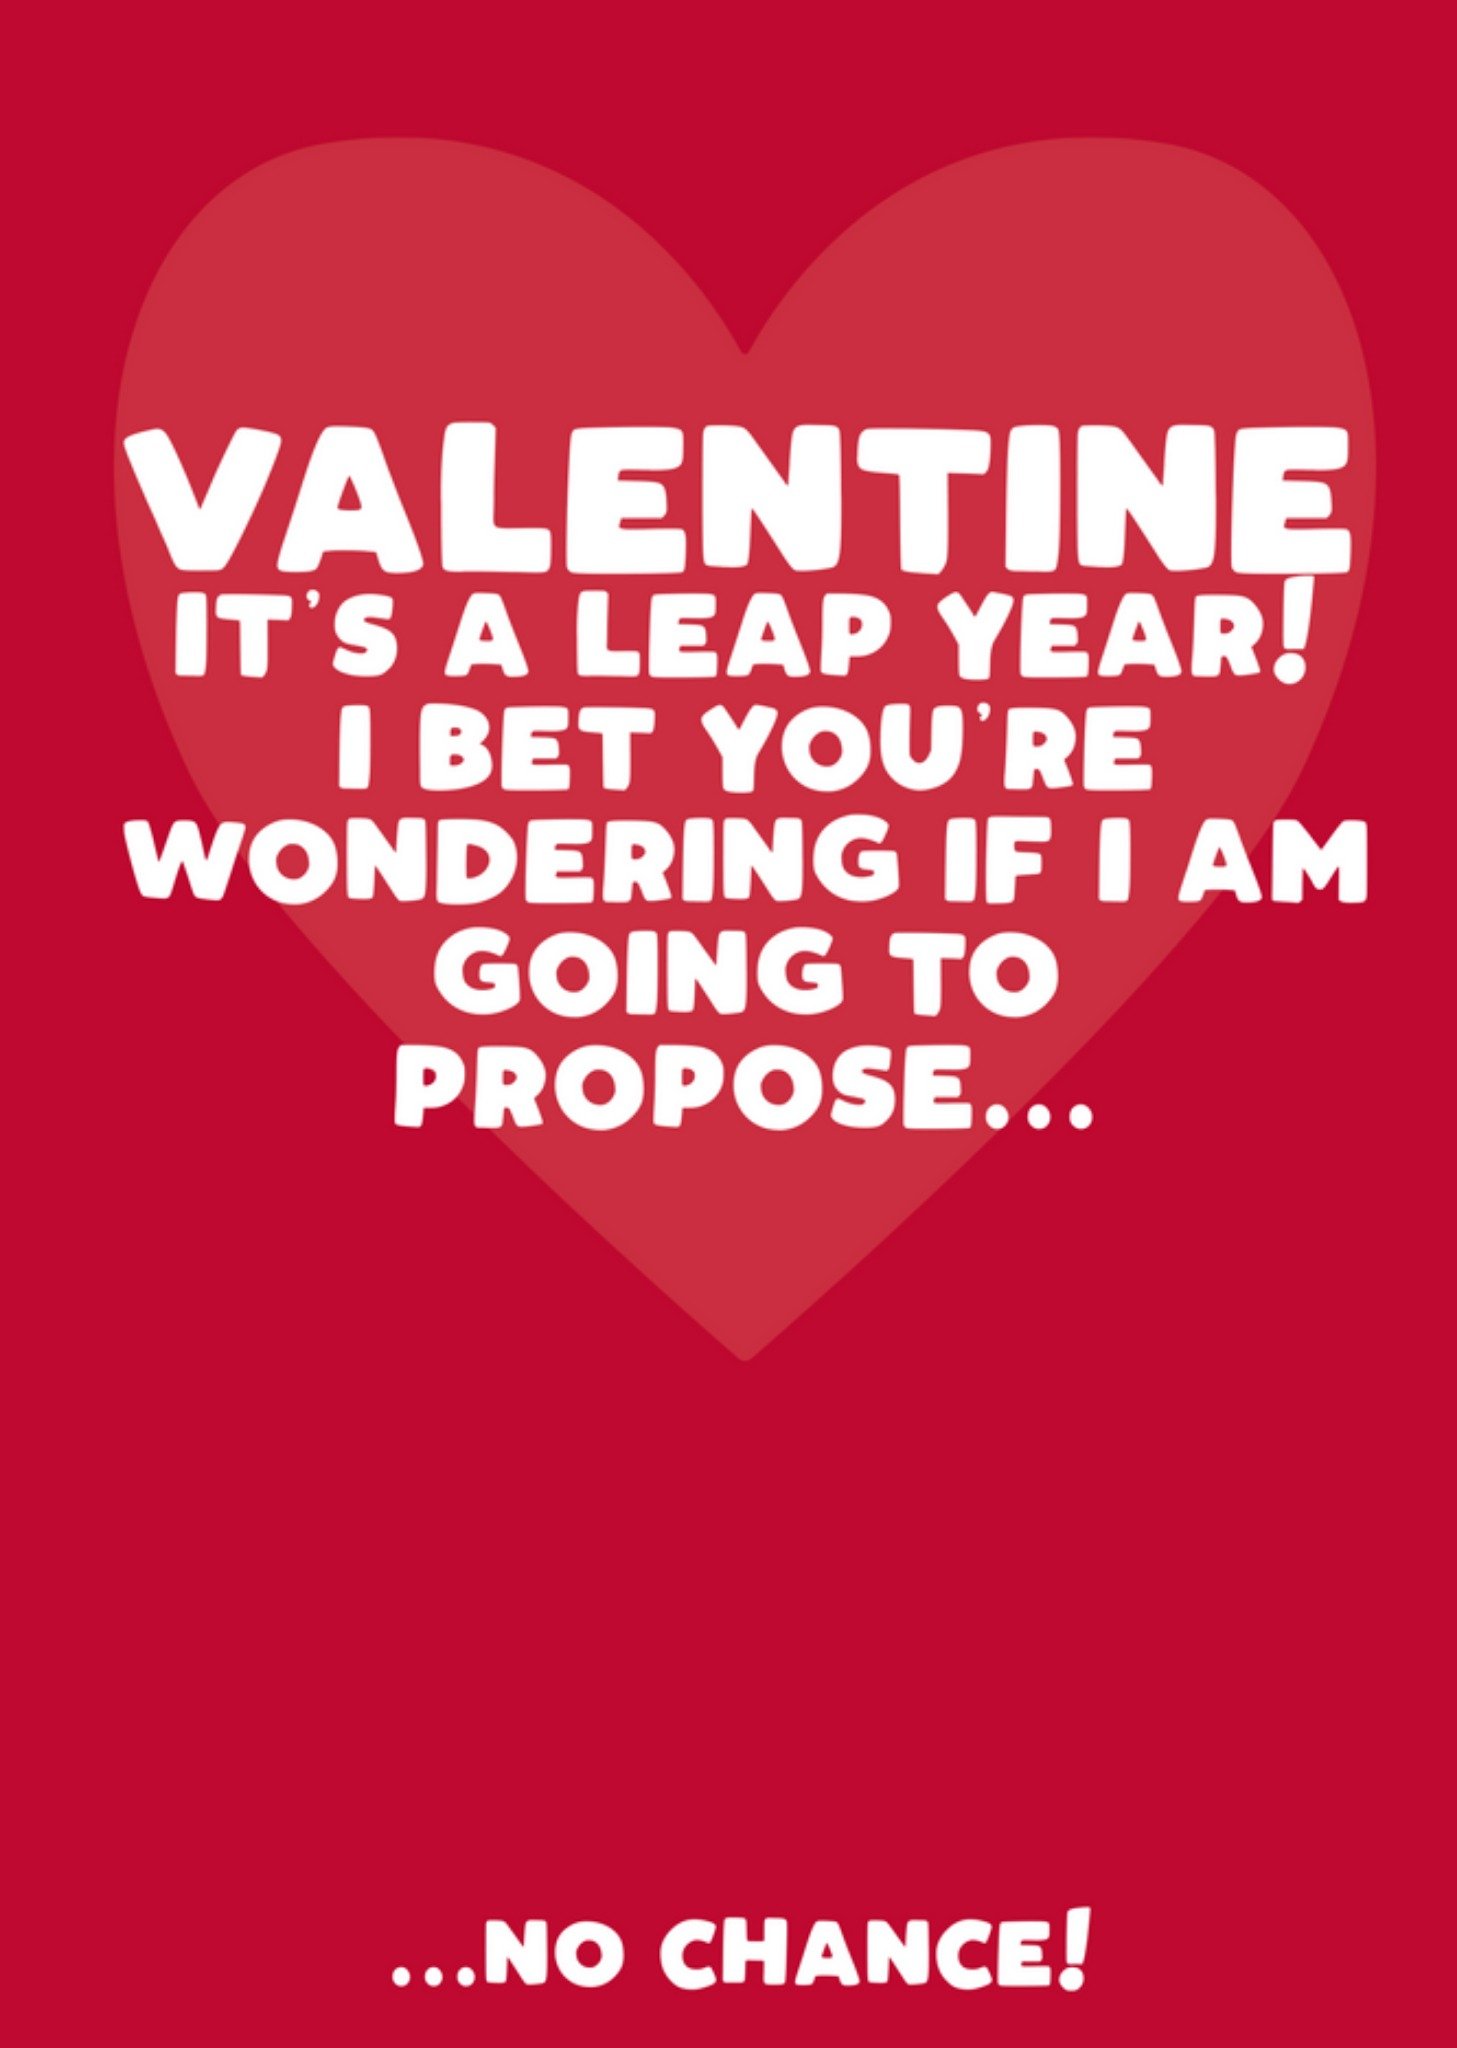 Moonpig I Bet You're Wondering If I'm Going To Propose... Valentine's Day Card, Large